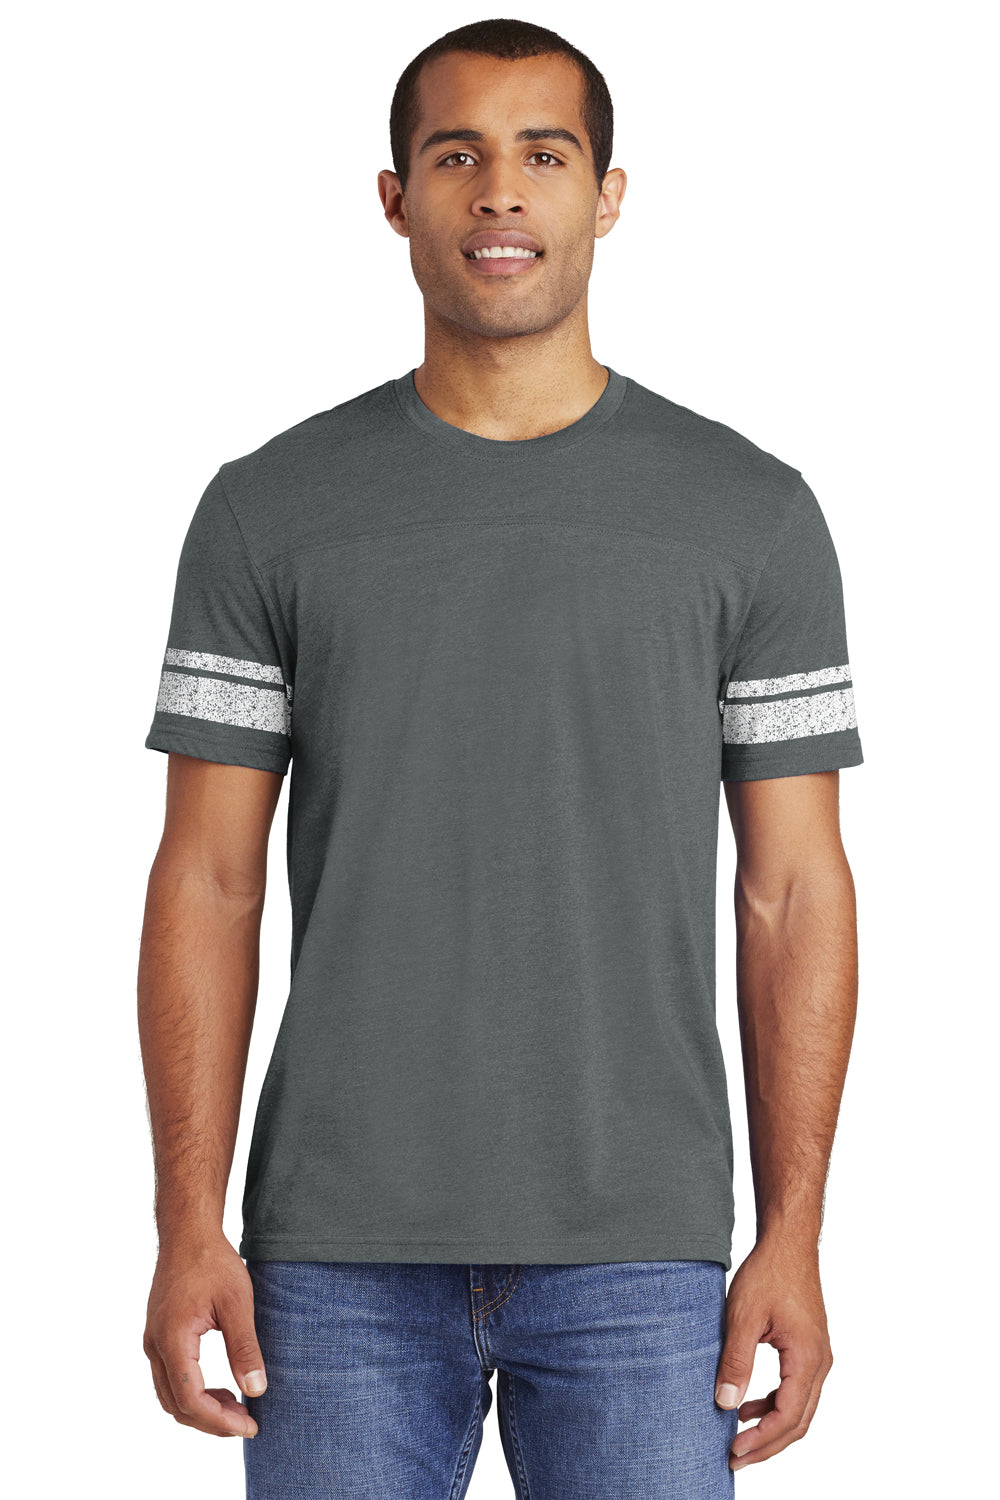 District DT376 Mens Game Short Sleeve Crewneck T-Shirt Heather Charcoal Grey/White Front